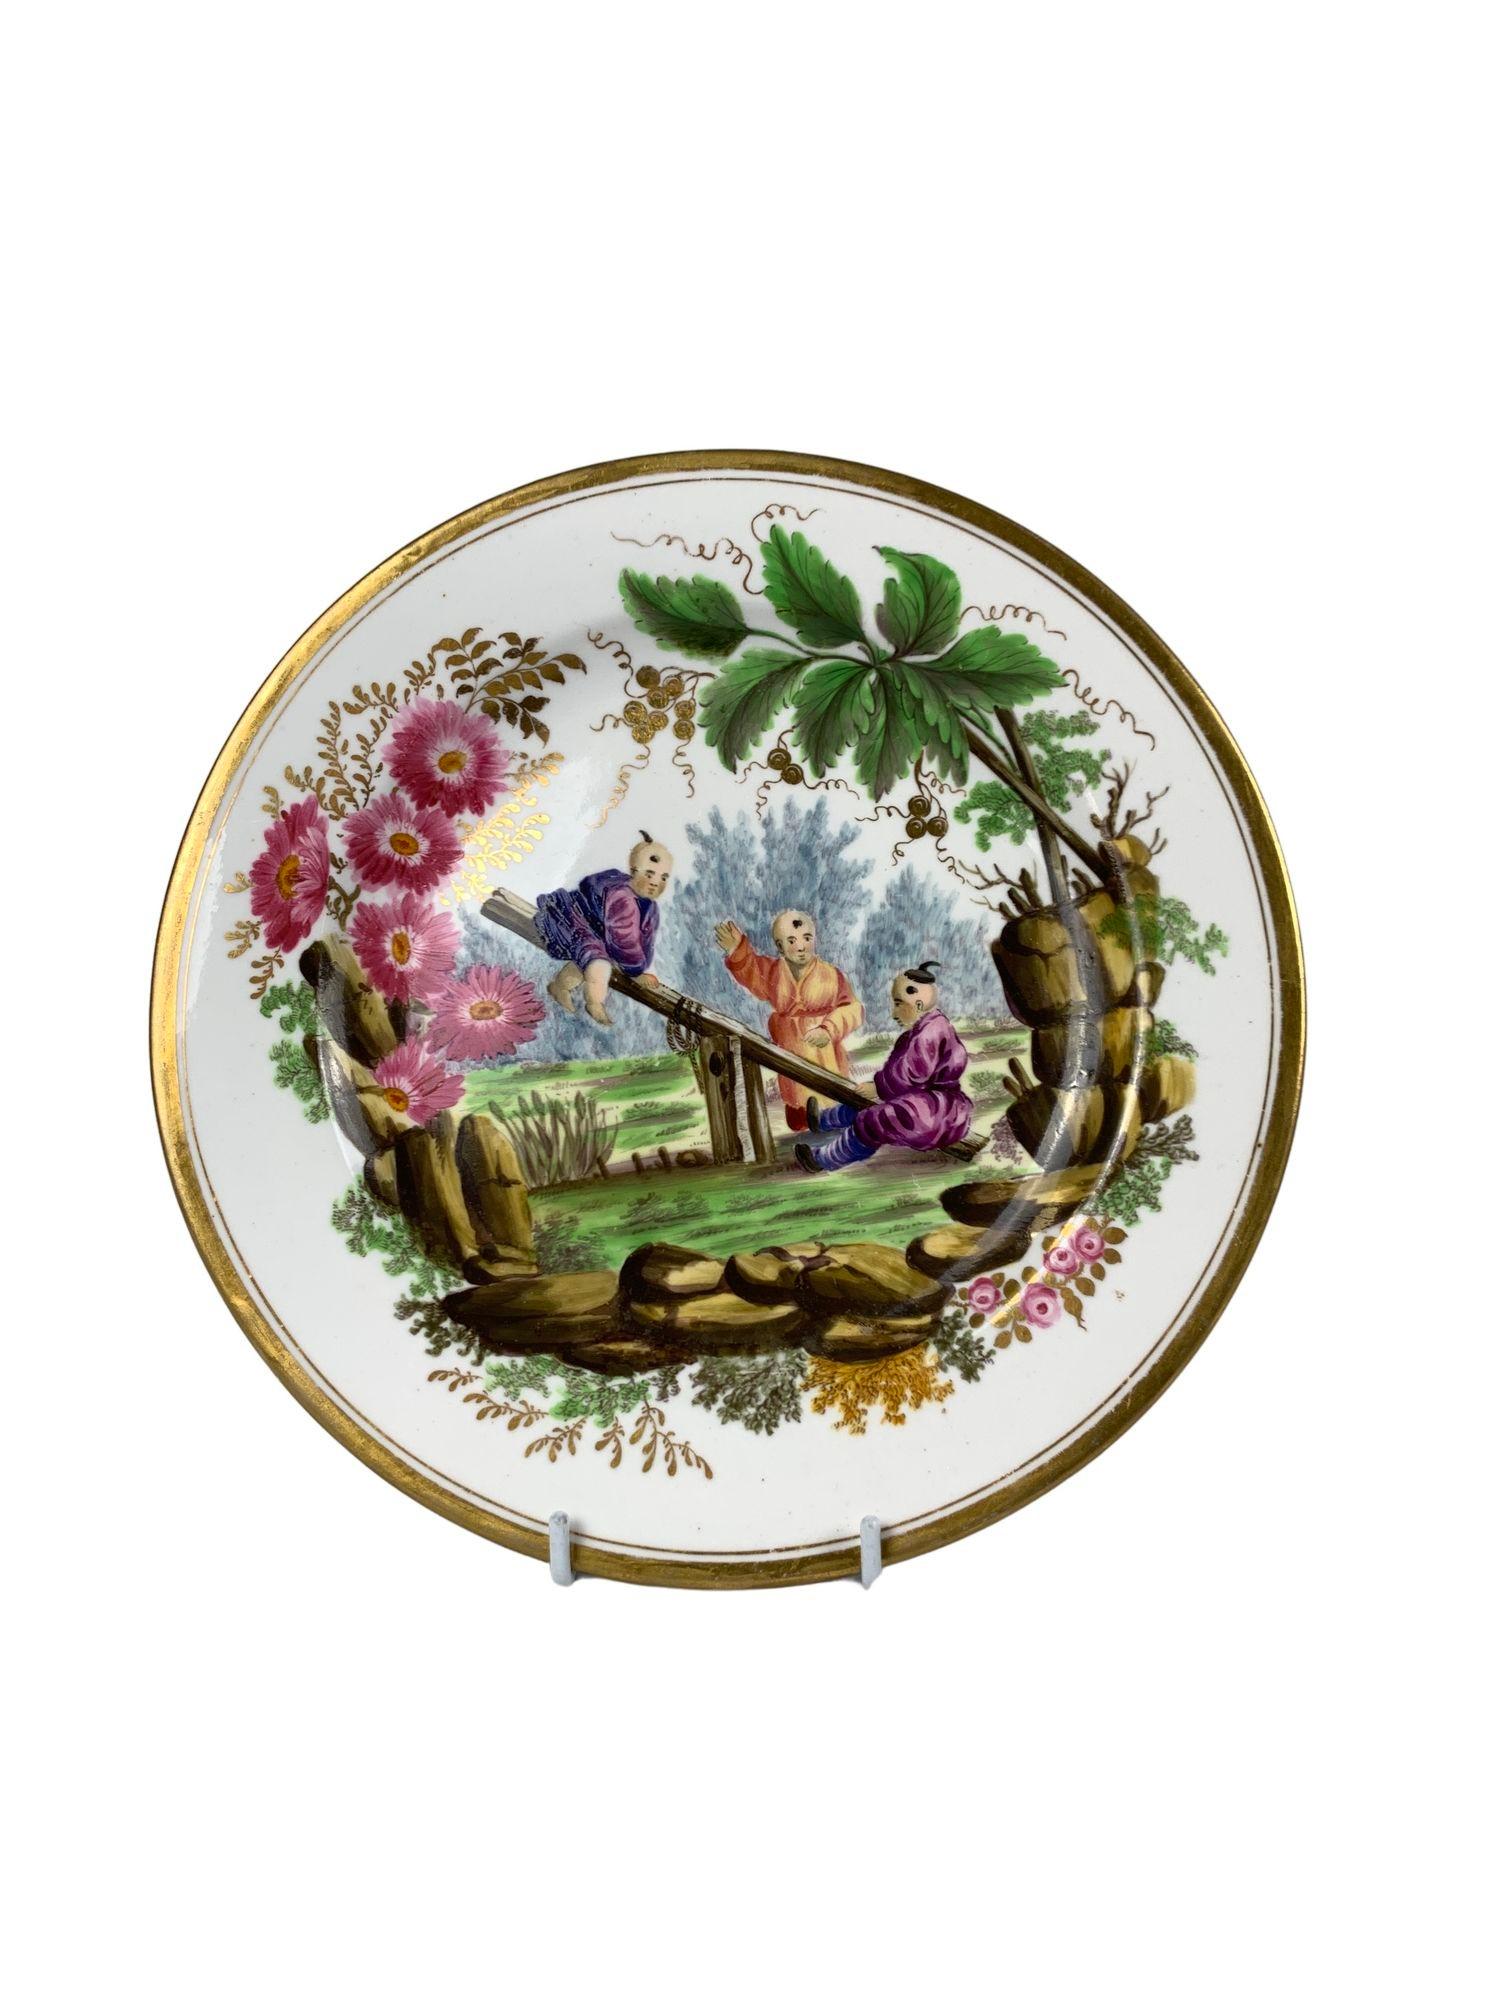 19th Century Antique Porcelain Chinoiserie Plate Hand Painted by Minton England Circa 1810 For Sale